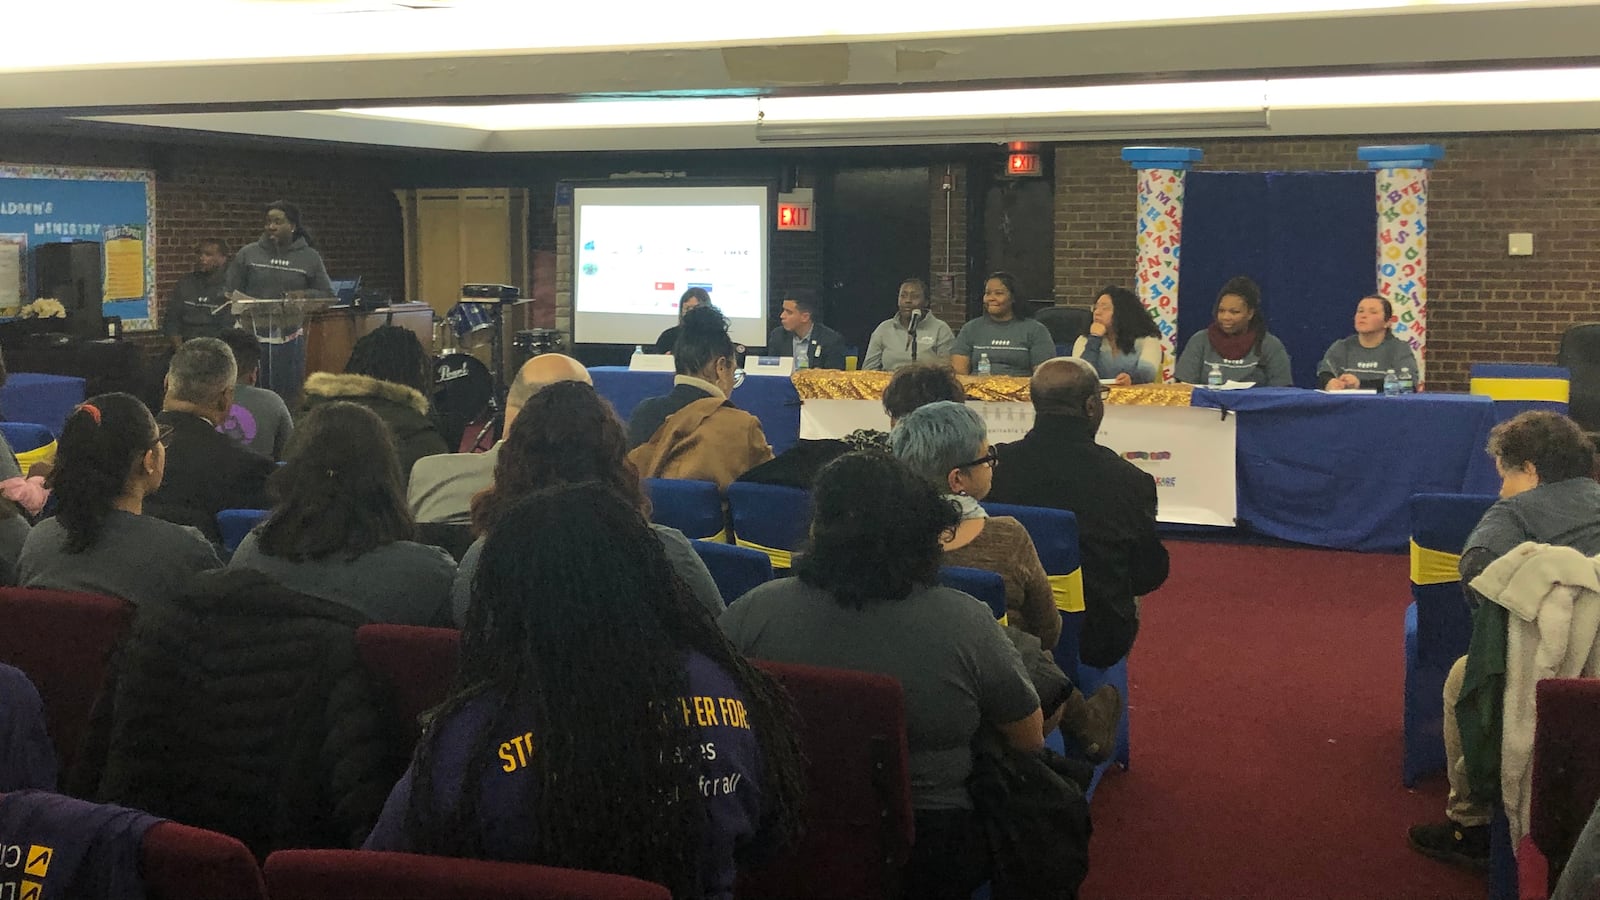 Parents anxious about upheaval in the day care and preschool systems in Chicago sought answers at a meeting Nov. 19, 2019, at Antioch Baptist Church in Englewood.